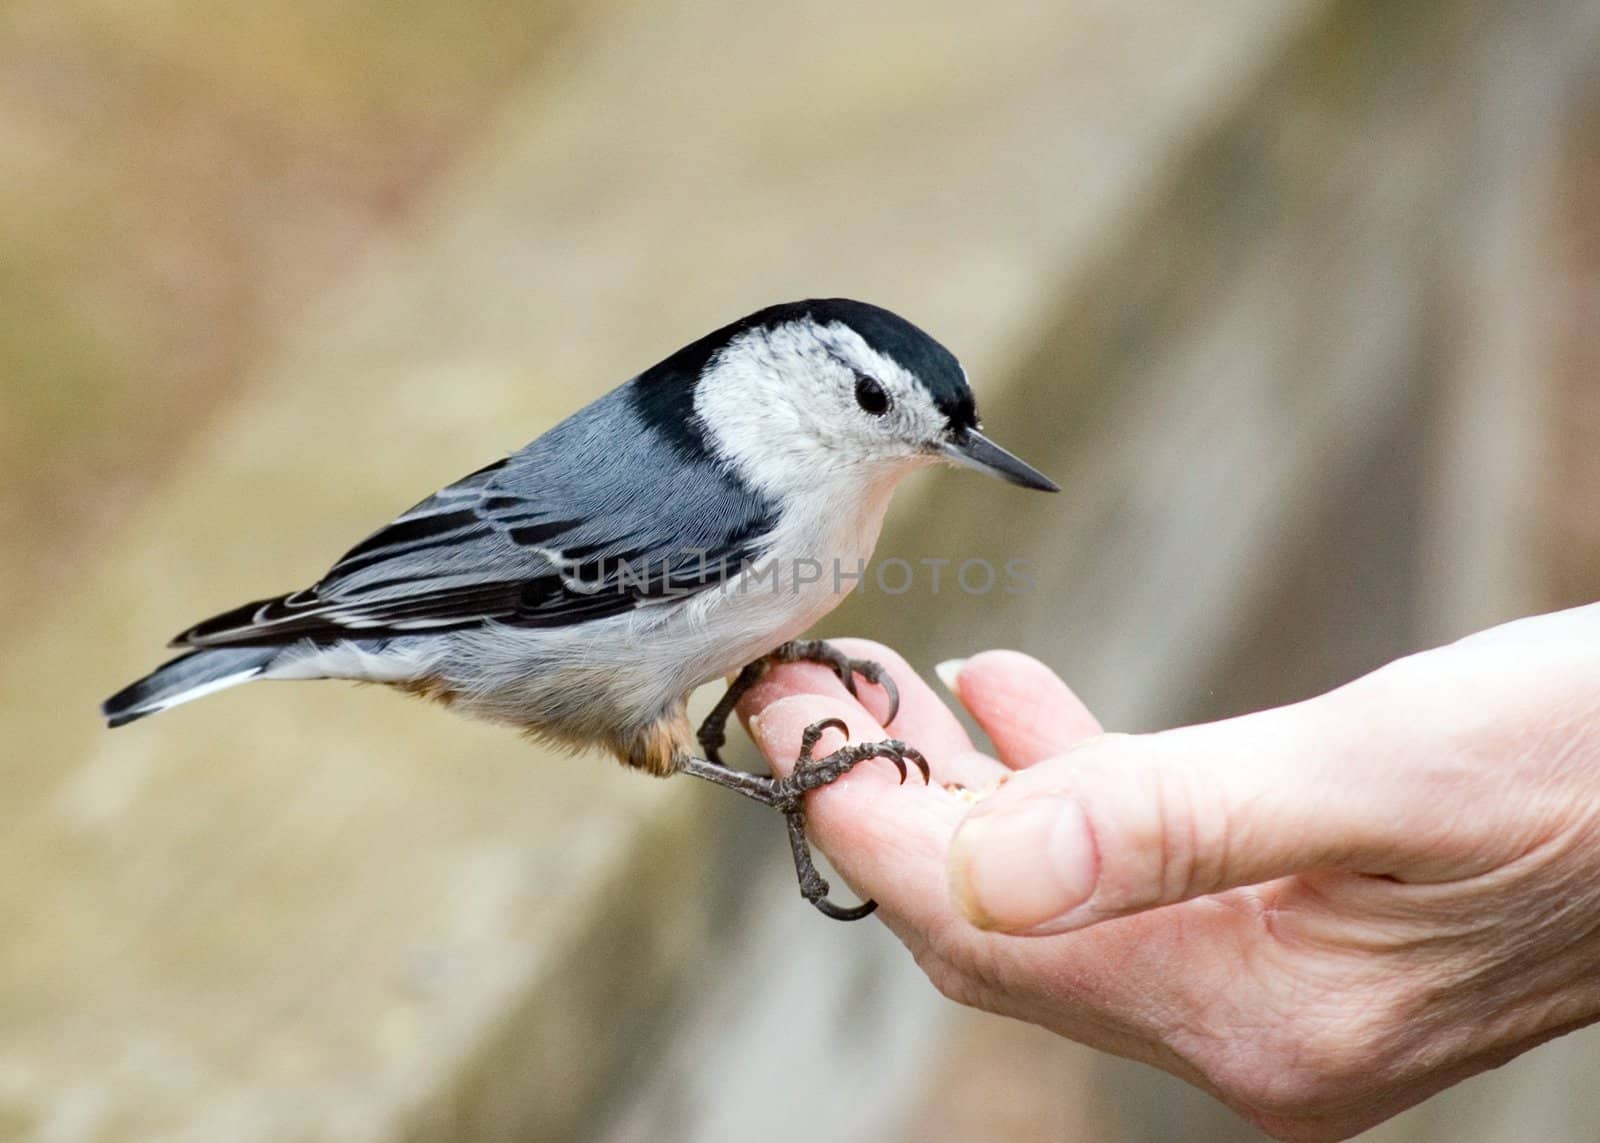 A white-breasted nuthatch perched on a hand.